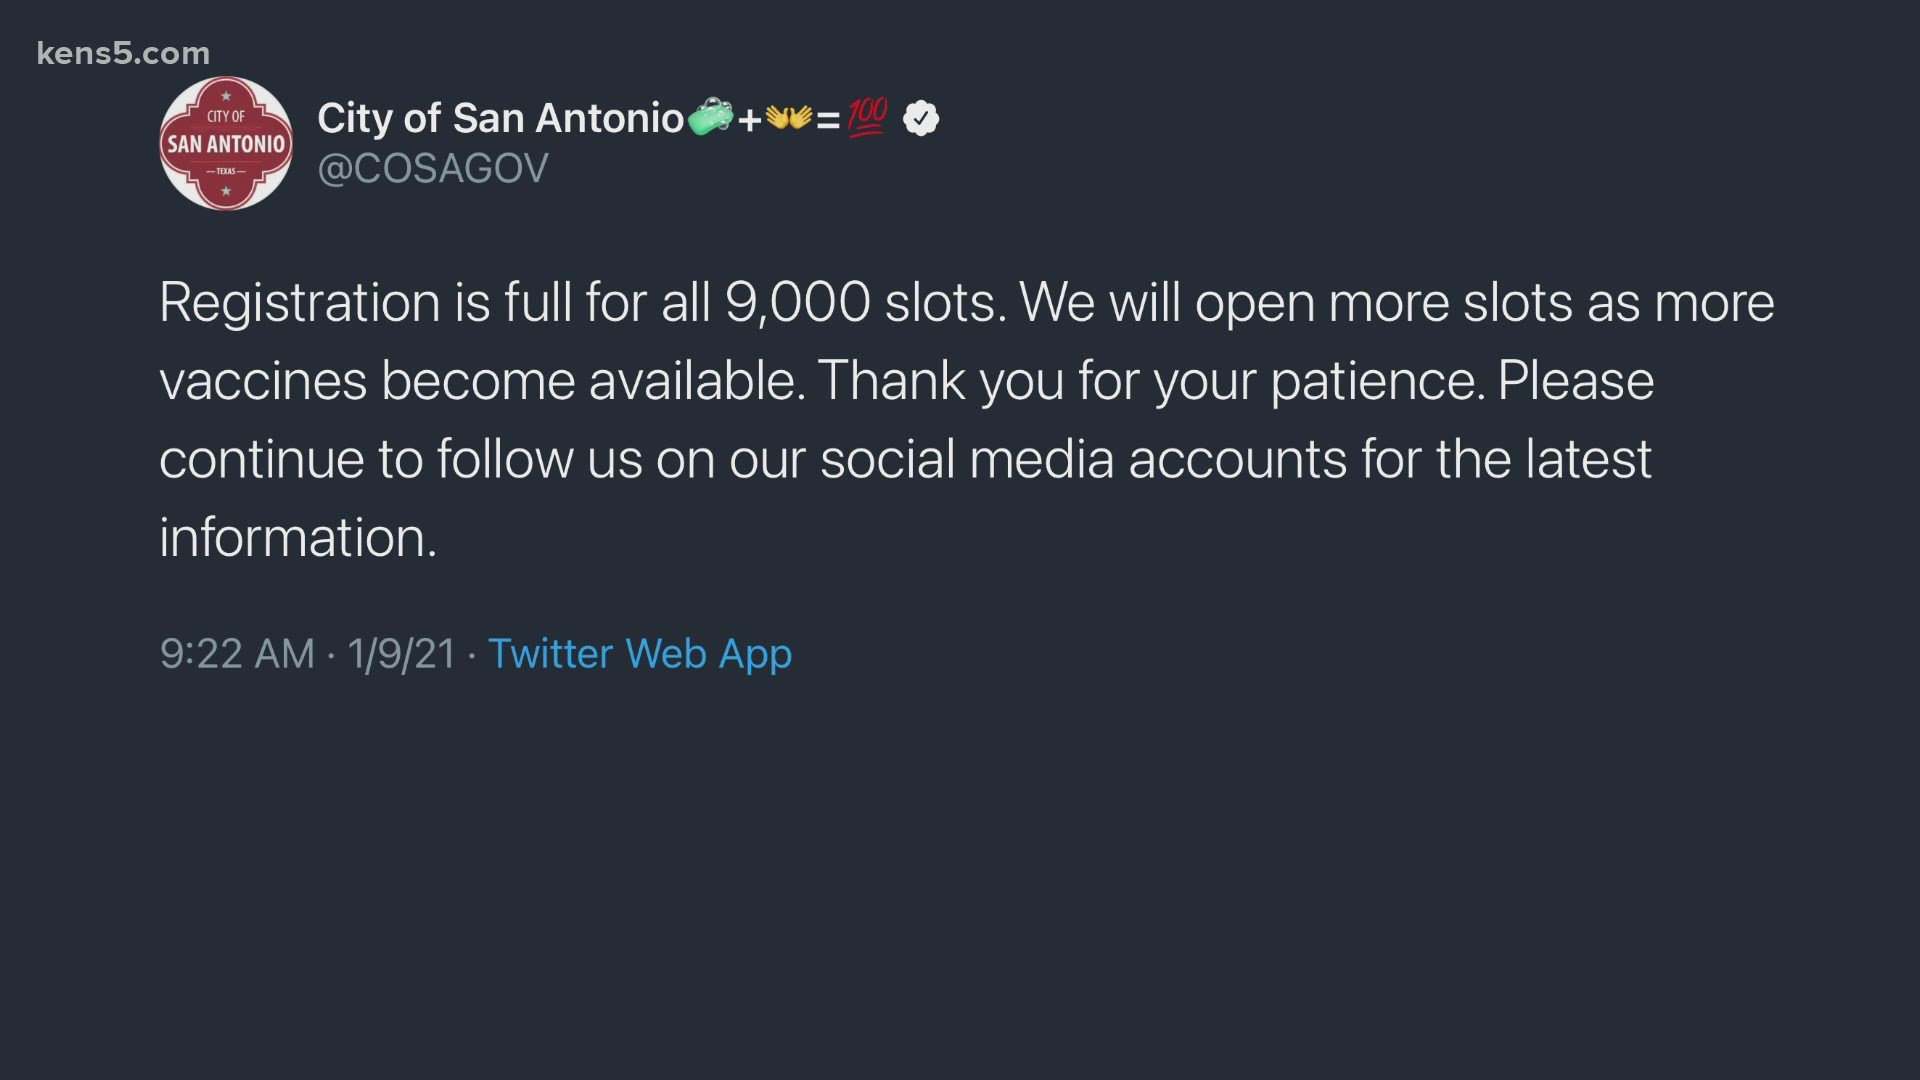 Less than 30 minutes after registration opened up, the City of San Antonio tweeted out that all 9,000 slots were claimed.